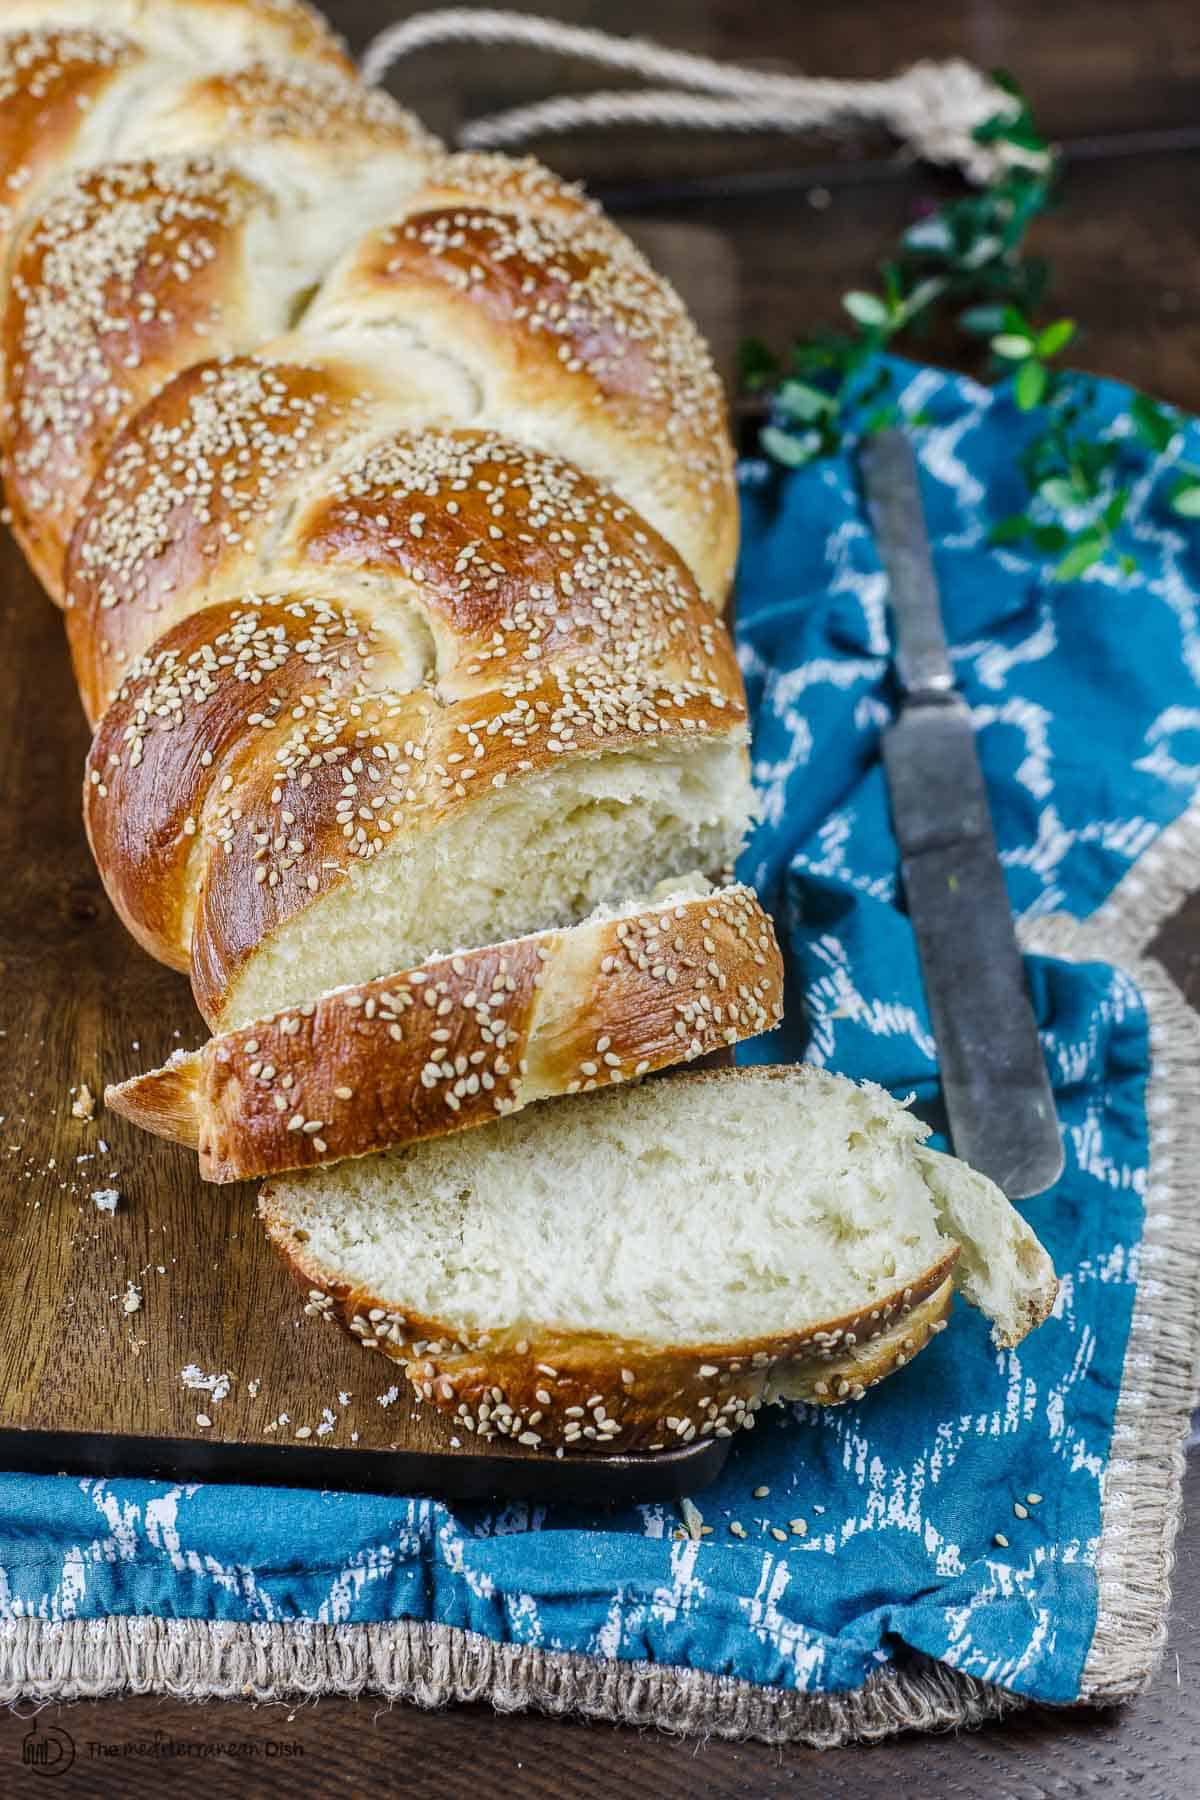 How to Make Challah Bread | Easy Challah Recipe - The Mediterranean Dish